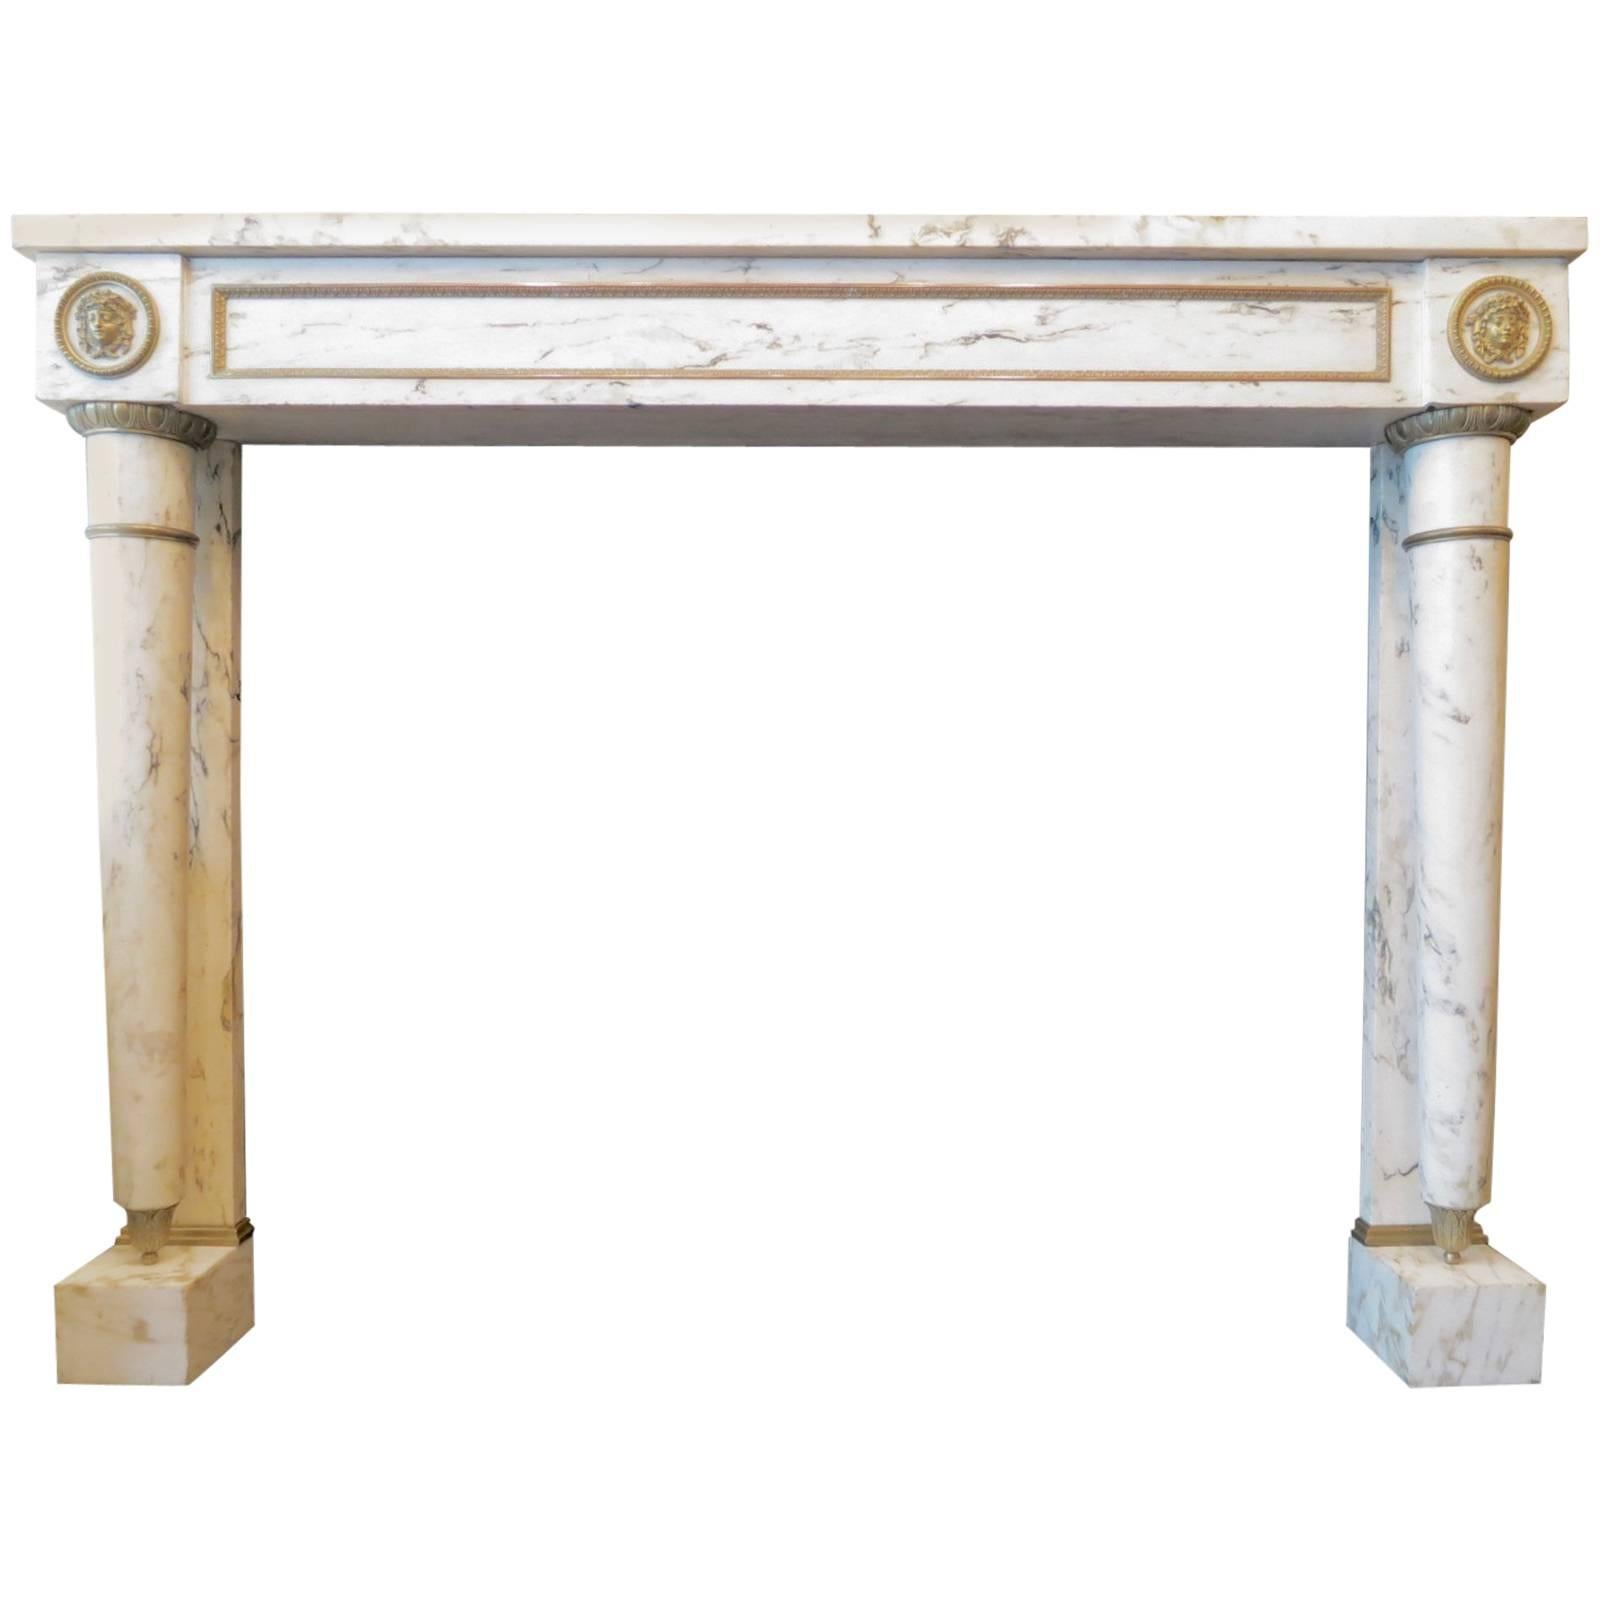 19th Century French Empire Style Fireplace Mantel in Breche Marble For Sale